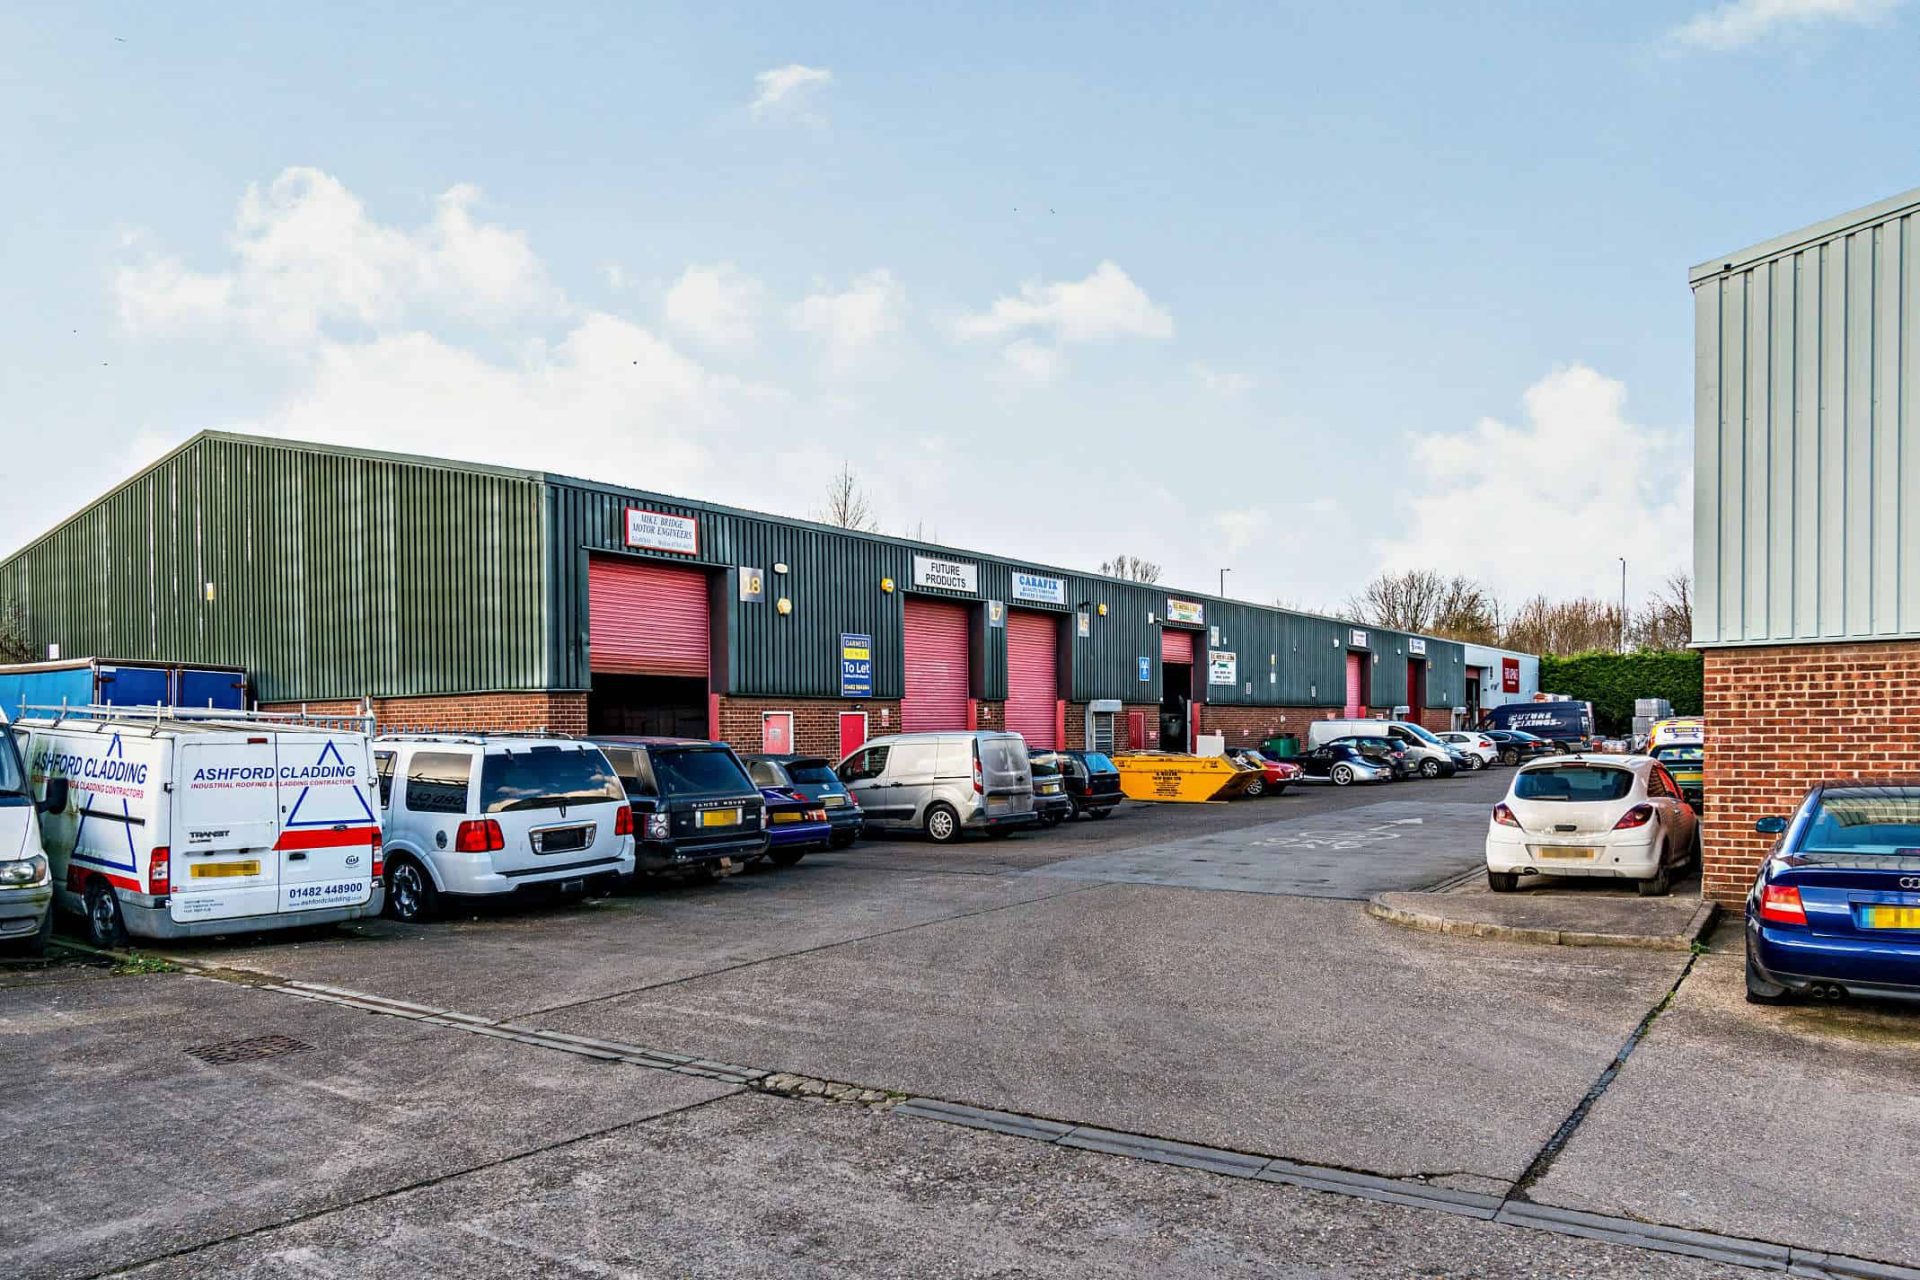 The outside space of industrial units